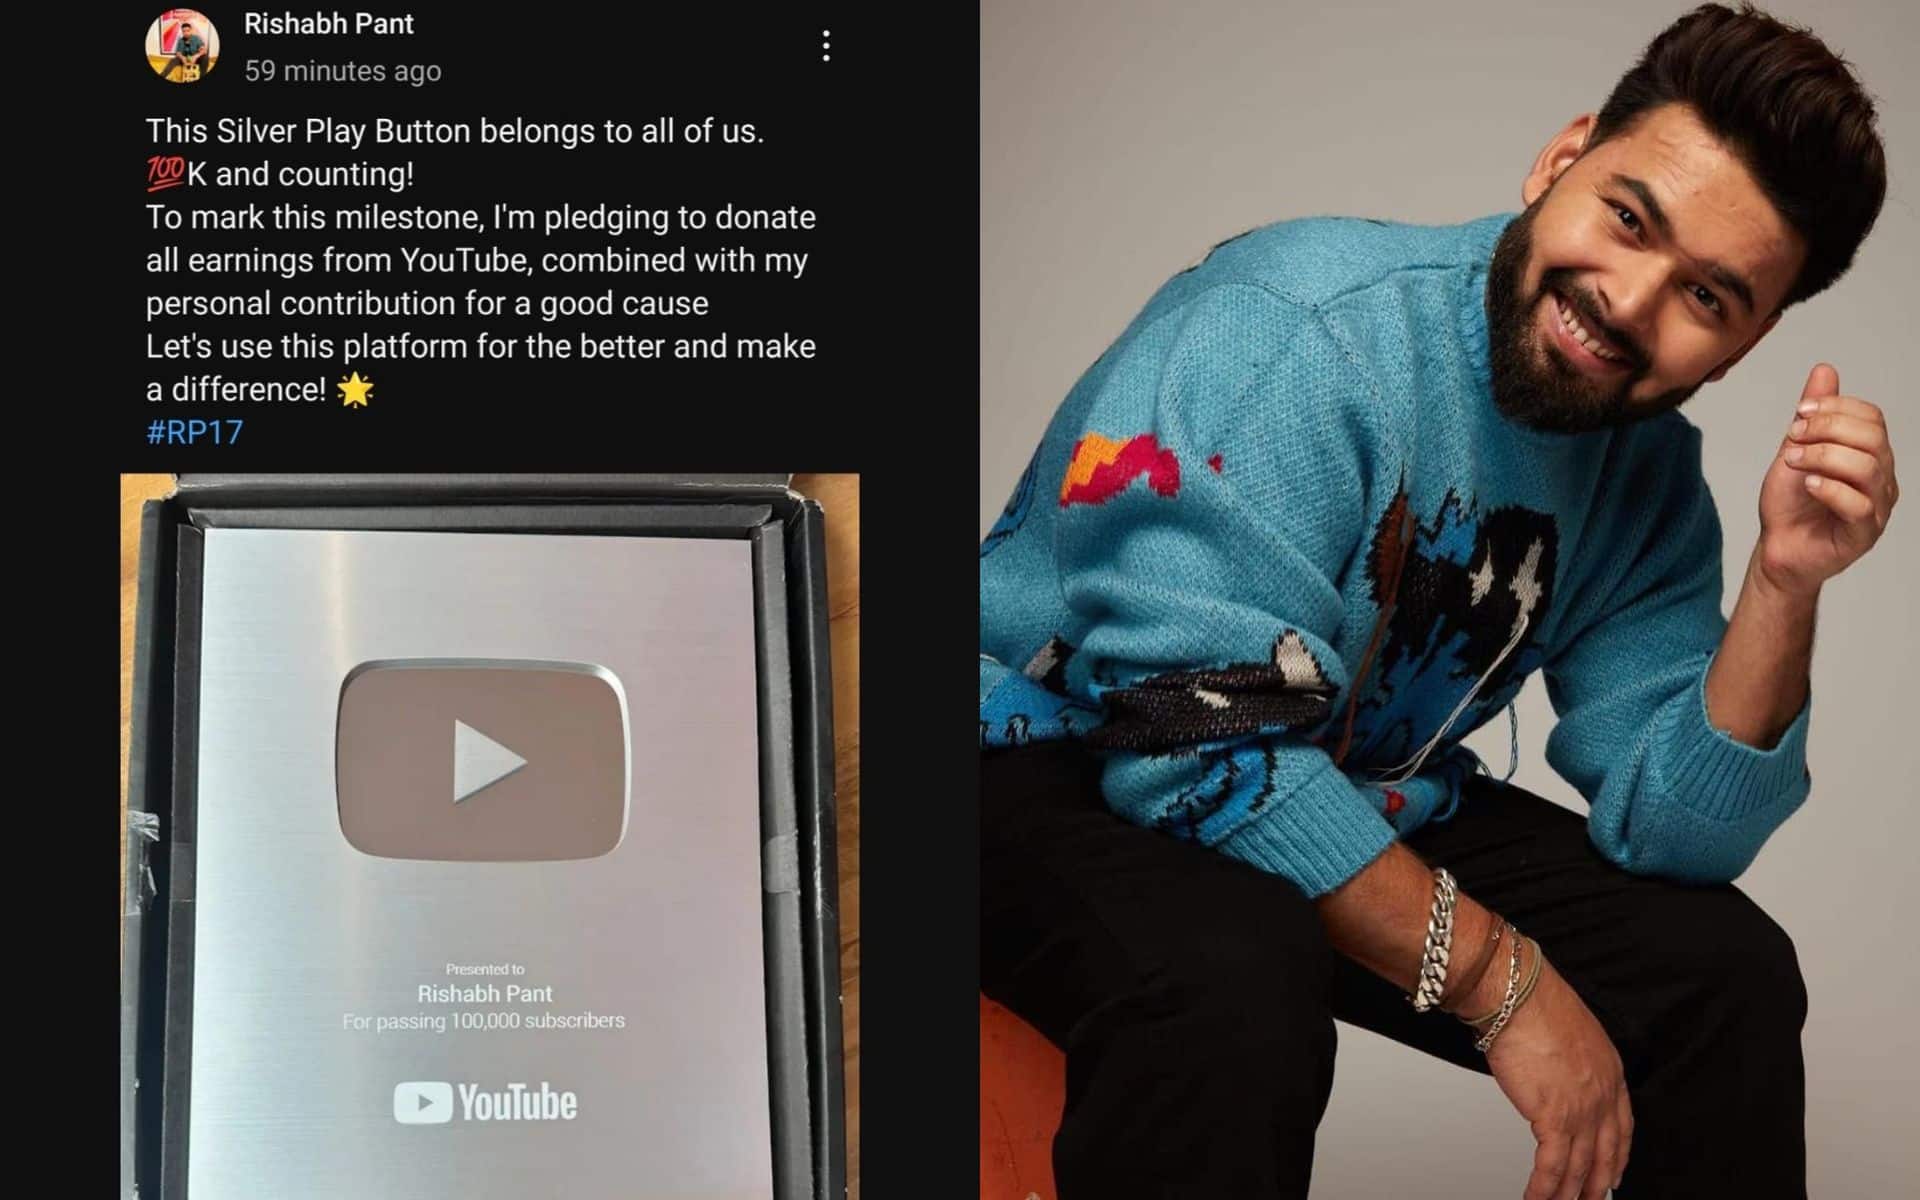 Rishabh Pant Pledges To Donate YouTube Earnings After Receiving Silver Play Button